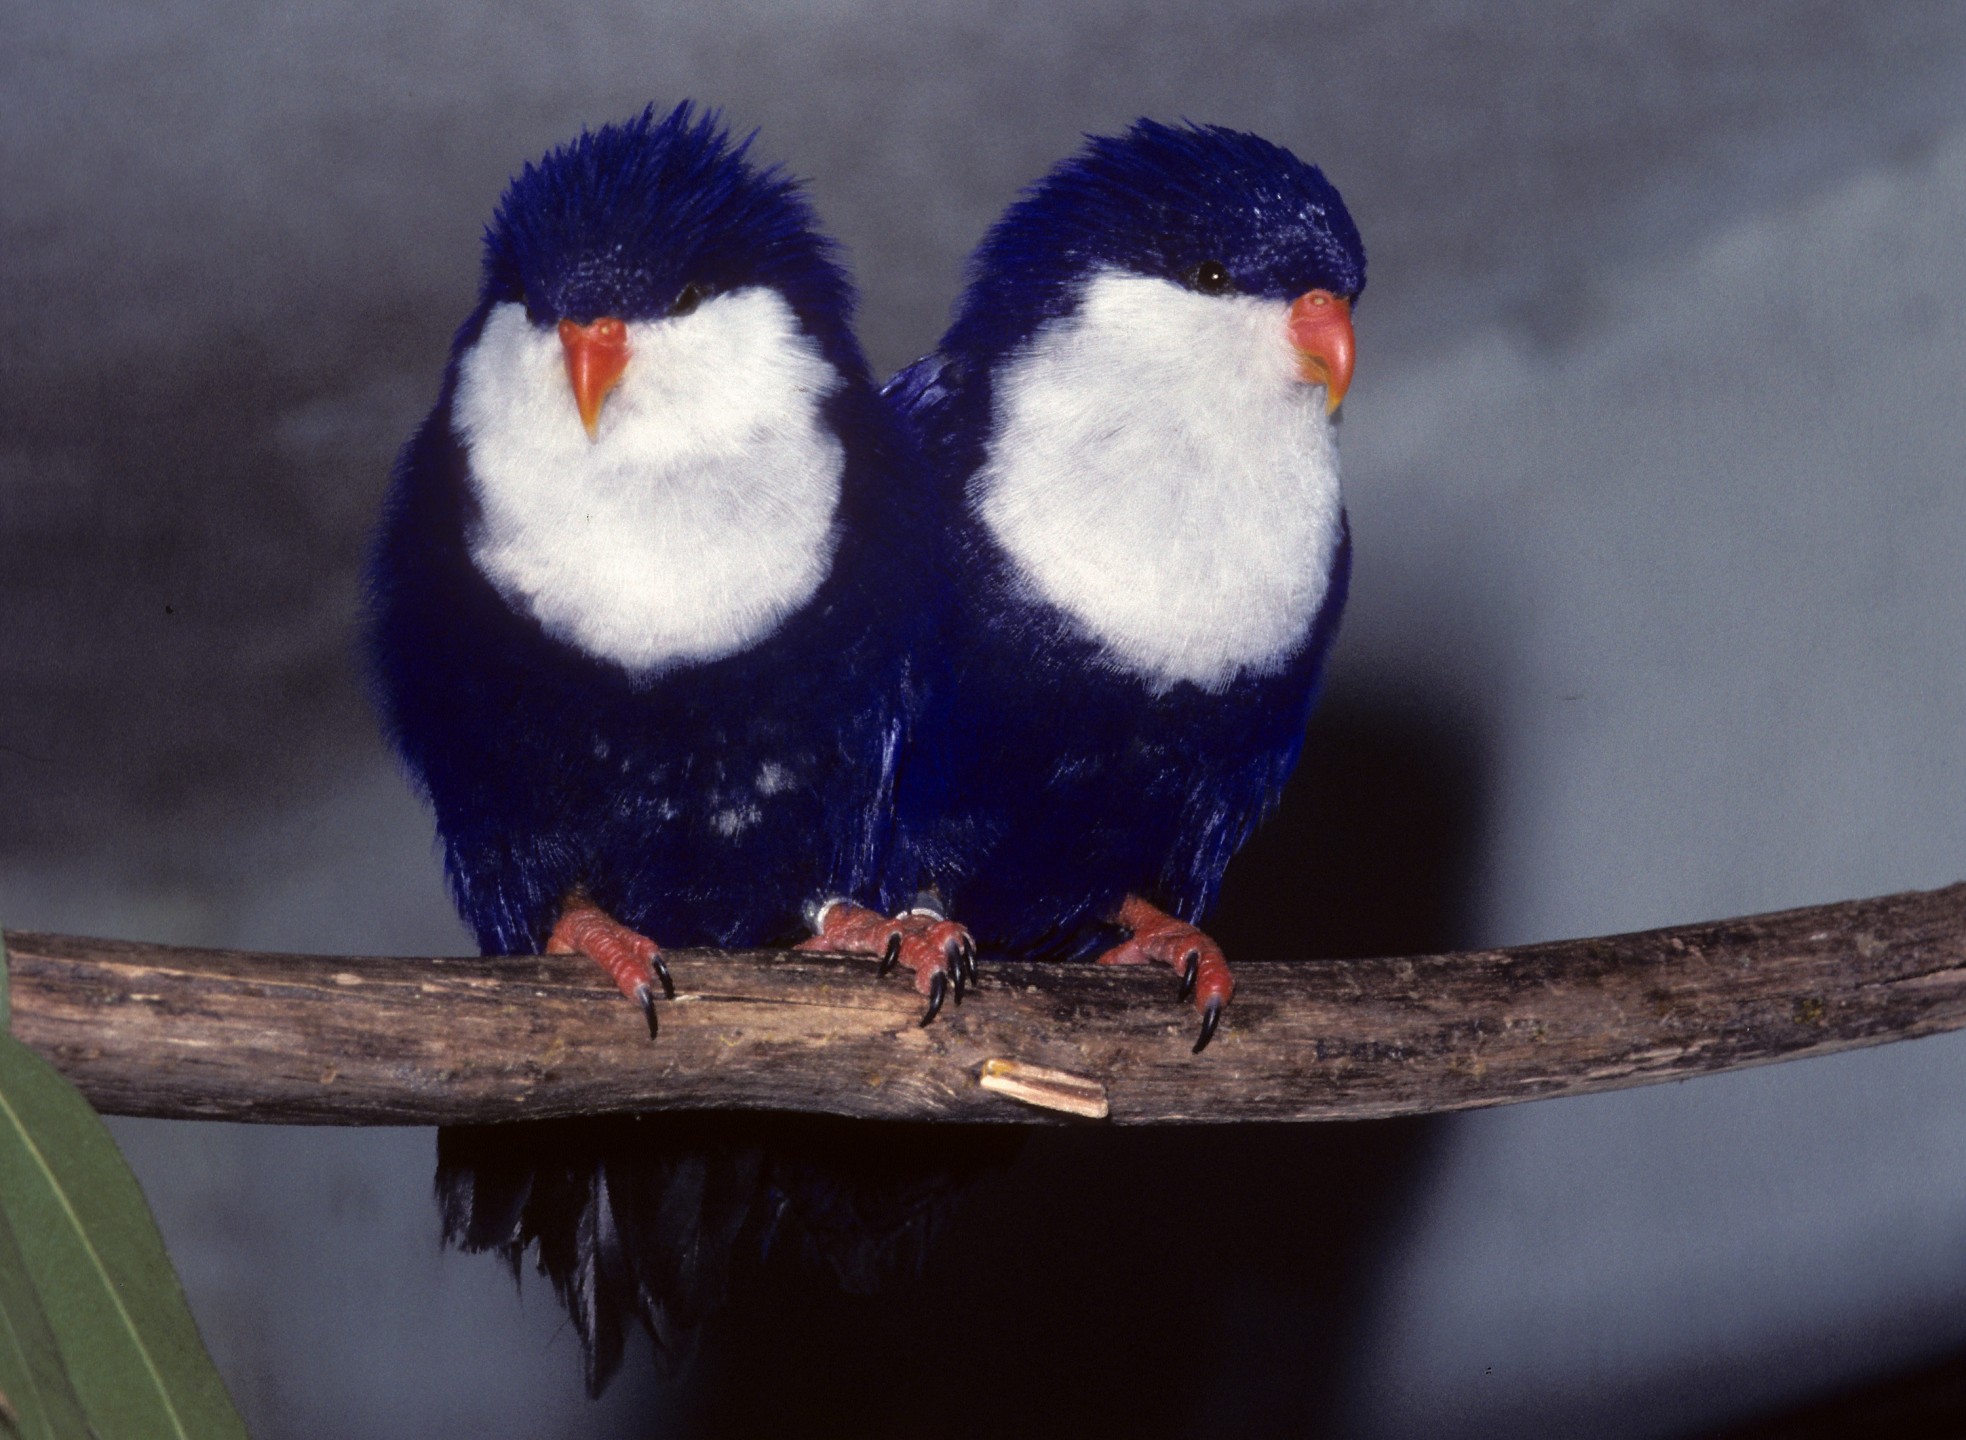 The beautiful and extremely rare Tahitian lories that went on exhibit at the San Diego Zoo in May 1978 were the lucky survivors of a bird smuggling operation. When curator of birds Dr. Art Risser was approached by two men asking for aviculture contacts in Southern California, he wondered, but he offered them the names of two colleagues. The next day, he heard from his contacts that the men were trying to sell Tahitian lories for $7,000 a pair. U.S. Customs and the U.S. Fish & Wildlife Service did an investigation, captured and tried the smugglers, and confiscated the birds. The problem was, U.S. Department of Agriculture regulations required that all birds entering the country be properly quarantined, and these lories clearly had not. The rule was that they should be destroyed, but that would be a terrible shame with a species of this rarity. The Wild Animal Park was allowed to keep the birds until a decision could be made, and Park general curator Dr. James Dolan brought the situation to the attention of the American Association of Zoological Parks and Aquariums and bird experts. The media in the U.S., Canada, and Mexico carried the story for several weeks, and the public insisted that the birds be saved. In the end, the lories were allowed to go to London to be quarantined at the home of a lory expert, and could then legally re-enter the U.S. In the meantime, a second group of smuggled Tahitian lories from the same smuggling operation were also confiscated—but the precedent had been set that they did not have to be destroyed. They were quarantined in Honolulu, and then came to the San Diego Zoo on trust and were exhibited to appreciative visitors, who were amazed by their story and glad that these extraordinary birds made it through such an ordeal.